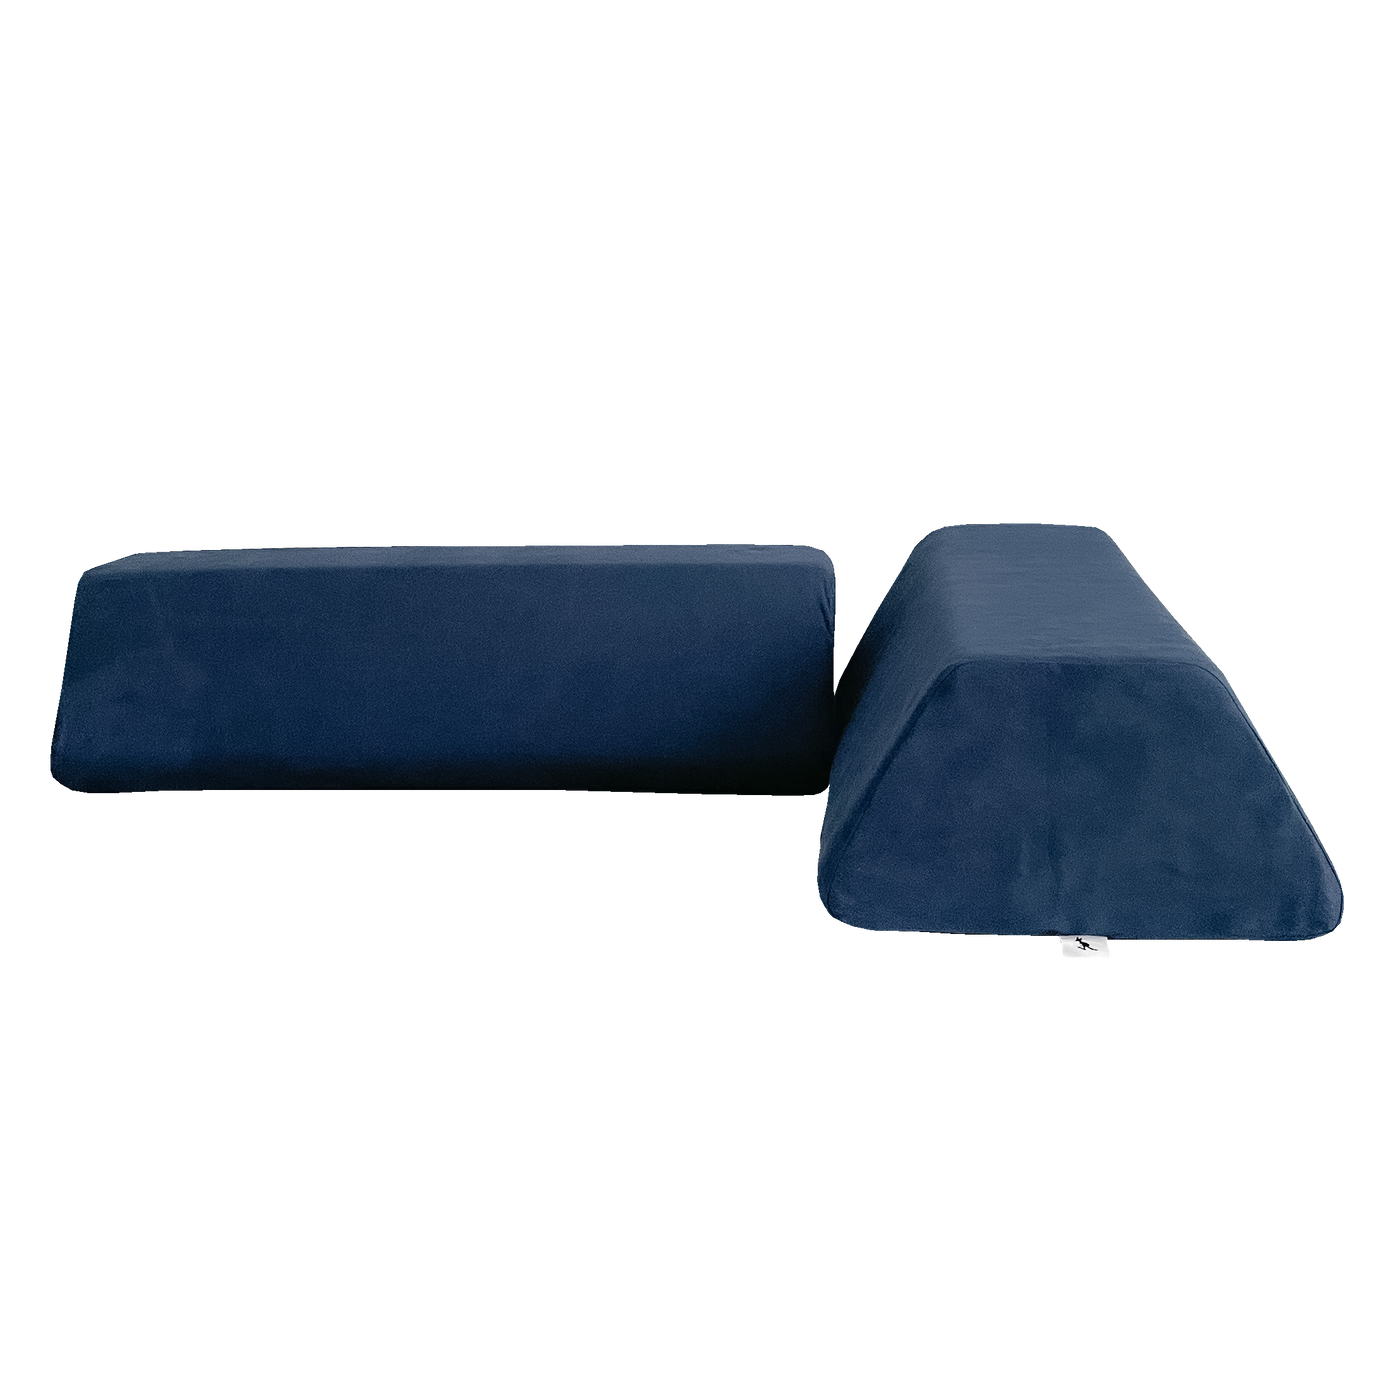 Trapezoid Cover Set (Microsuede Fabric)